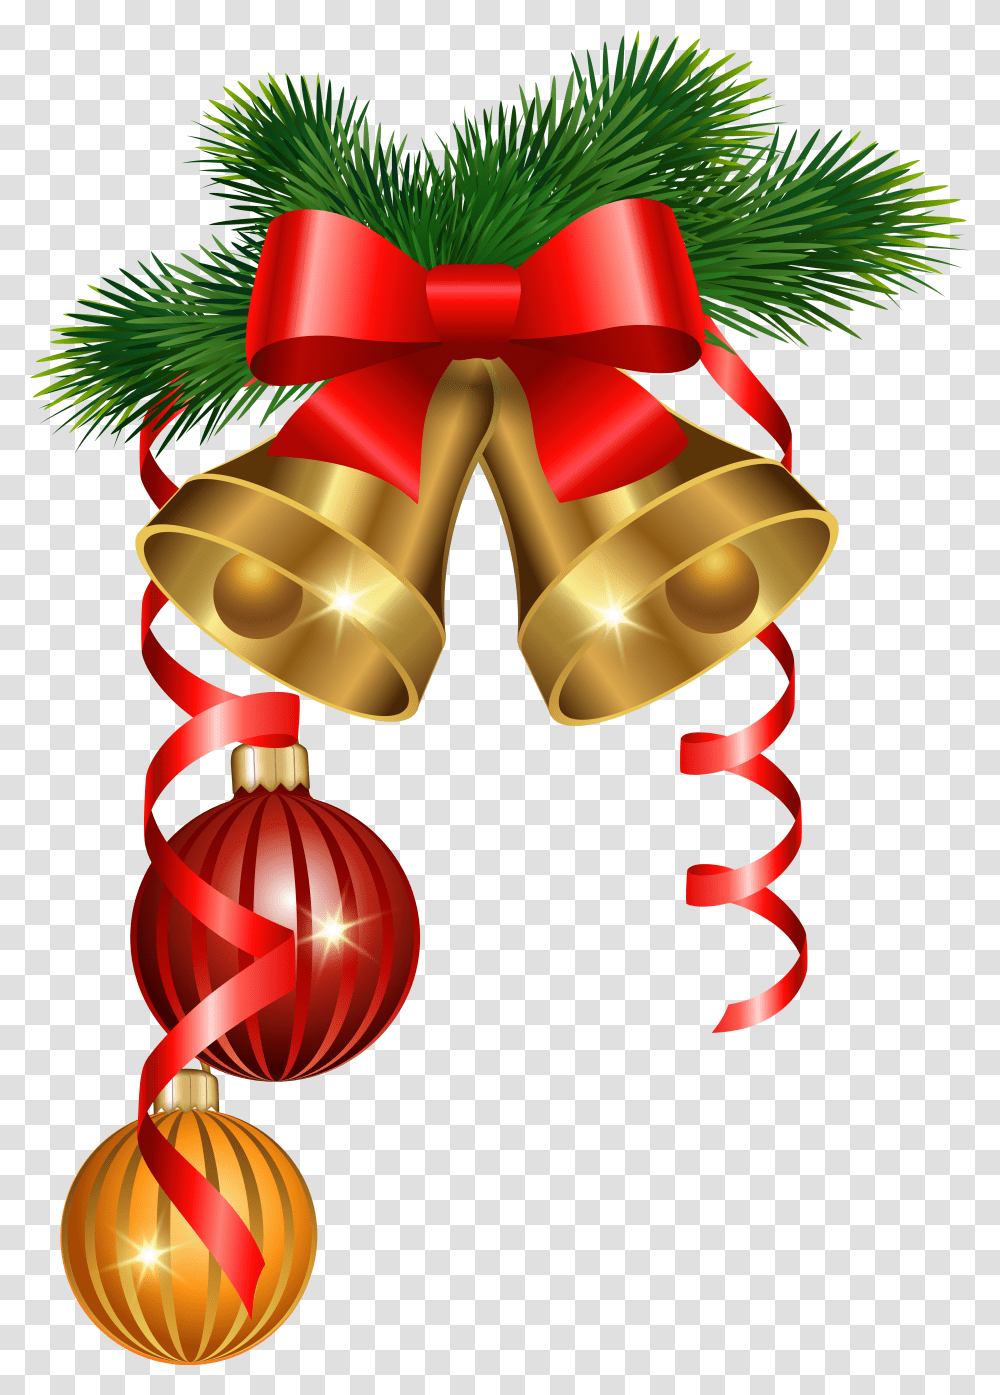 And Golden Tree Decoration Ornaments Christmas Bells Merry Christmas Bells Transparent Png